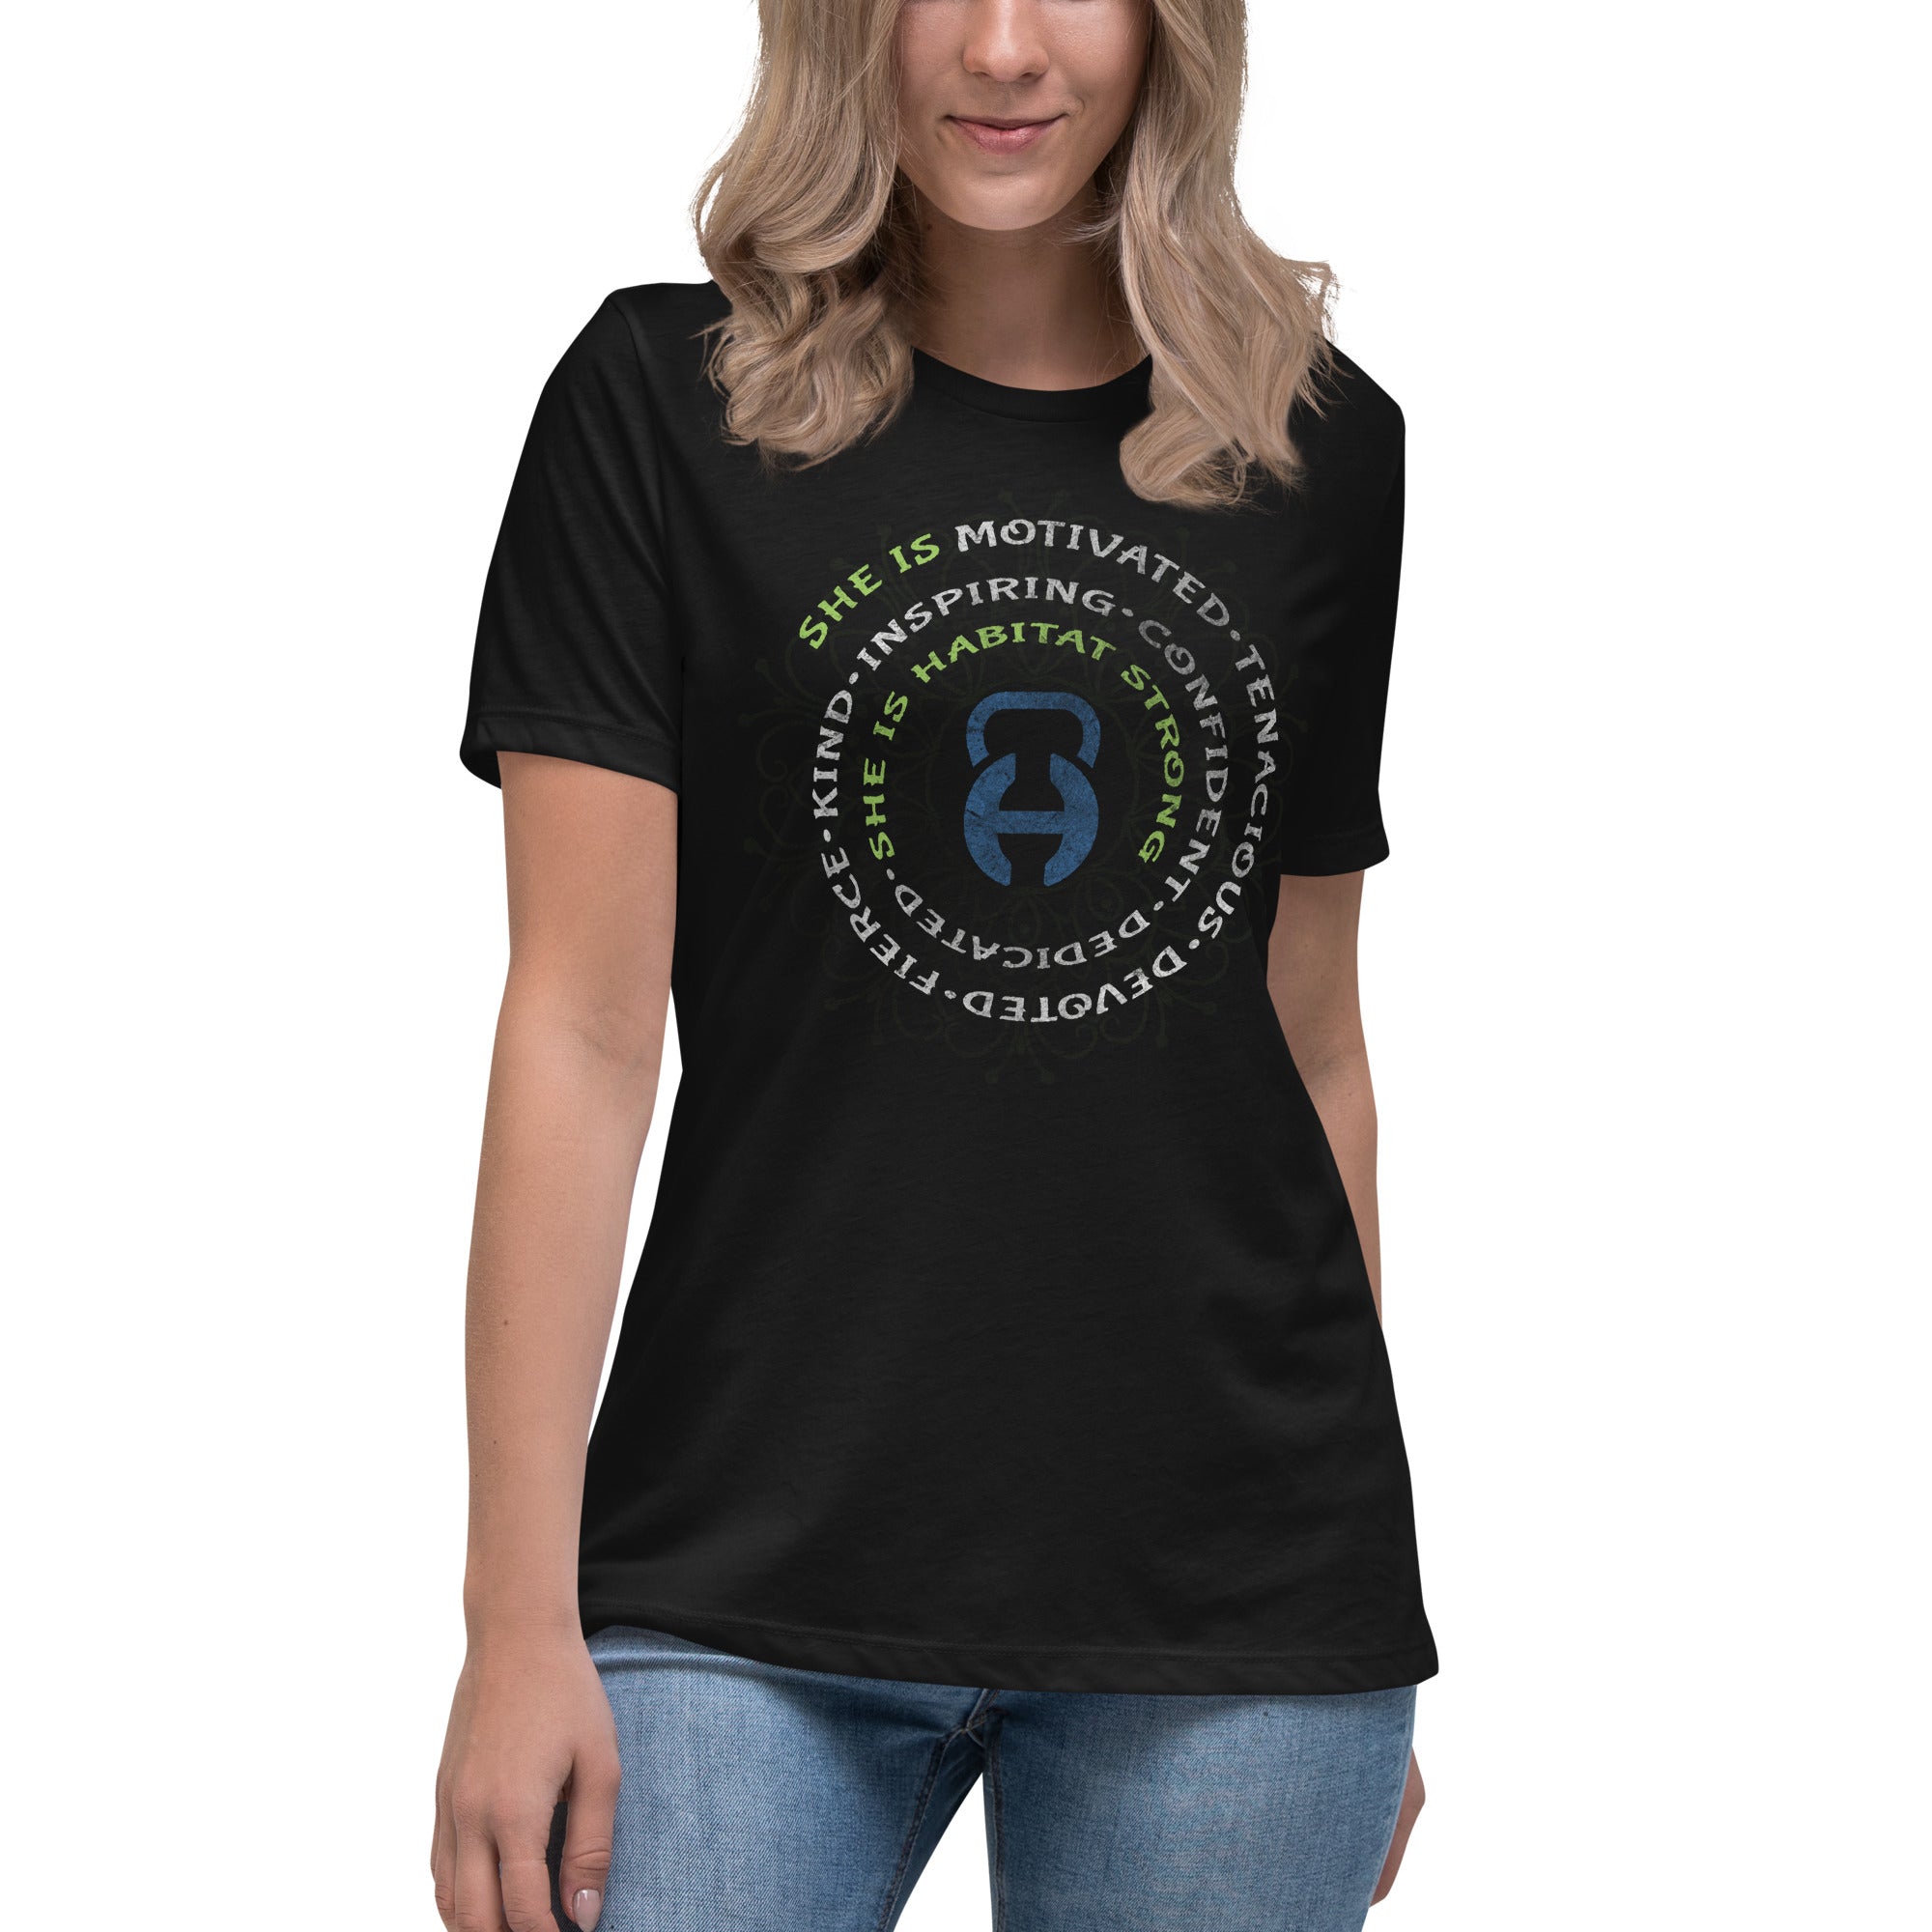 She is Women's Relaxed T-Shirt